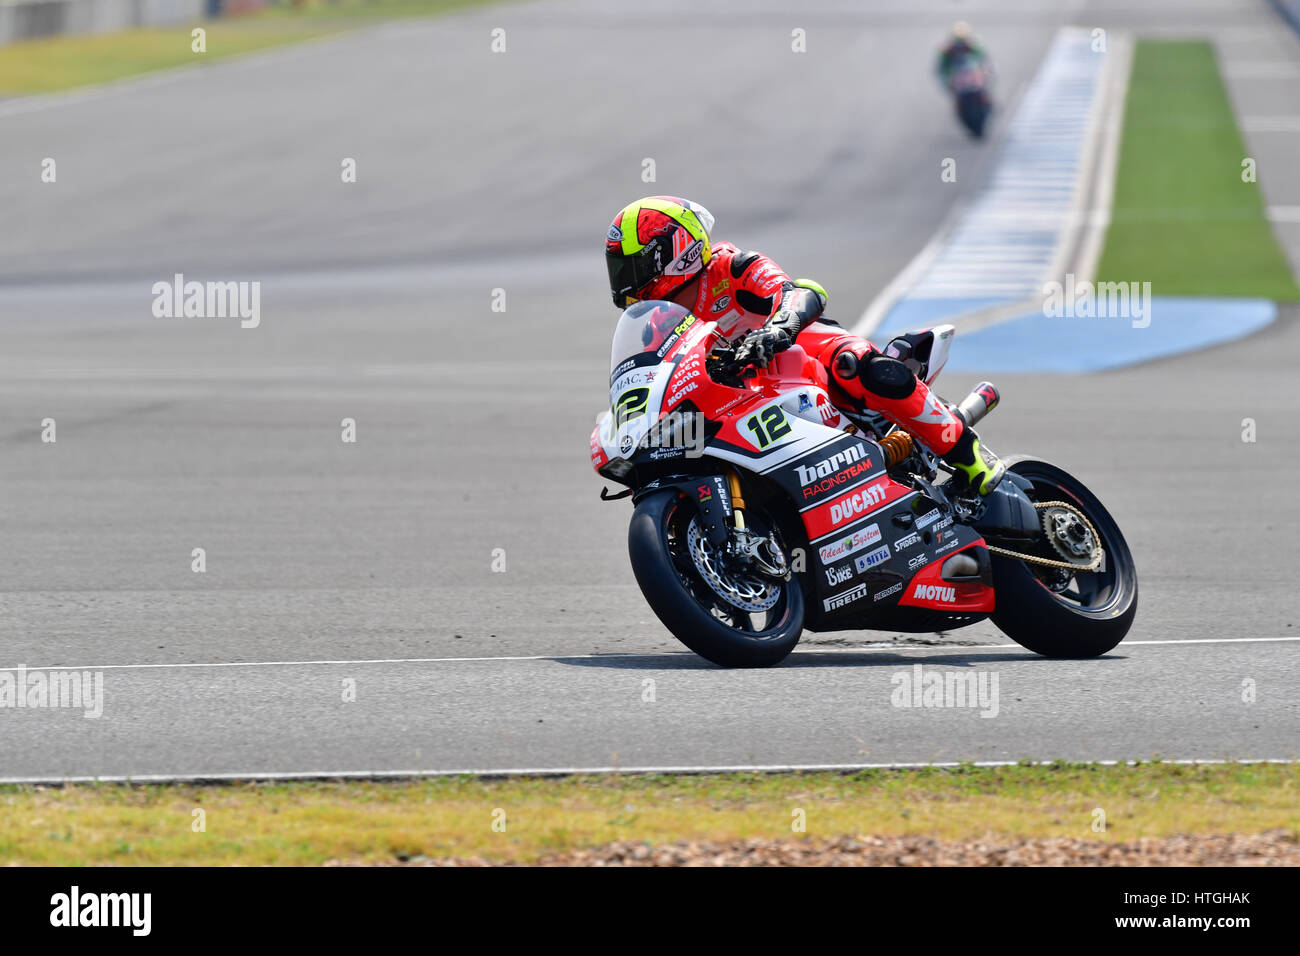 Buriram, Thailand. 11th Mar, 2017. Xavi Fores #12 of Spain with Ducati Panigale R in FIM Superbike World Championship (SBK) at Chang International Circuit on March 11, 2017 in Buriram Thailand. Credit: Chatchai Somwat/Alamy Live News Stock Photo